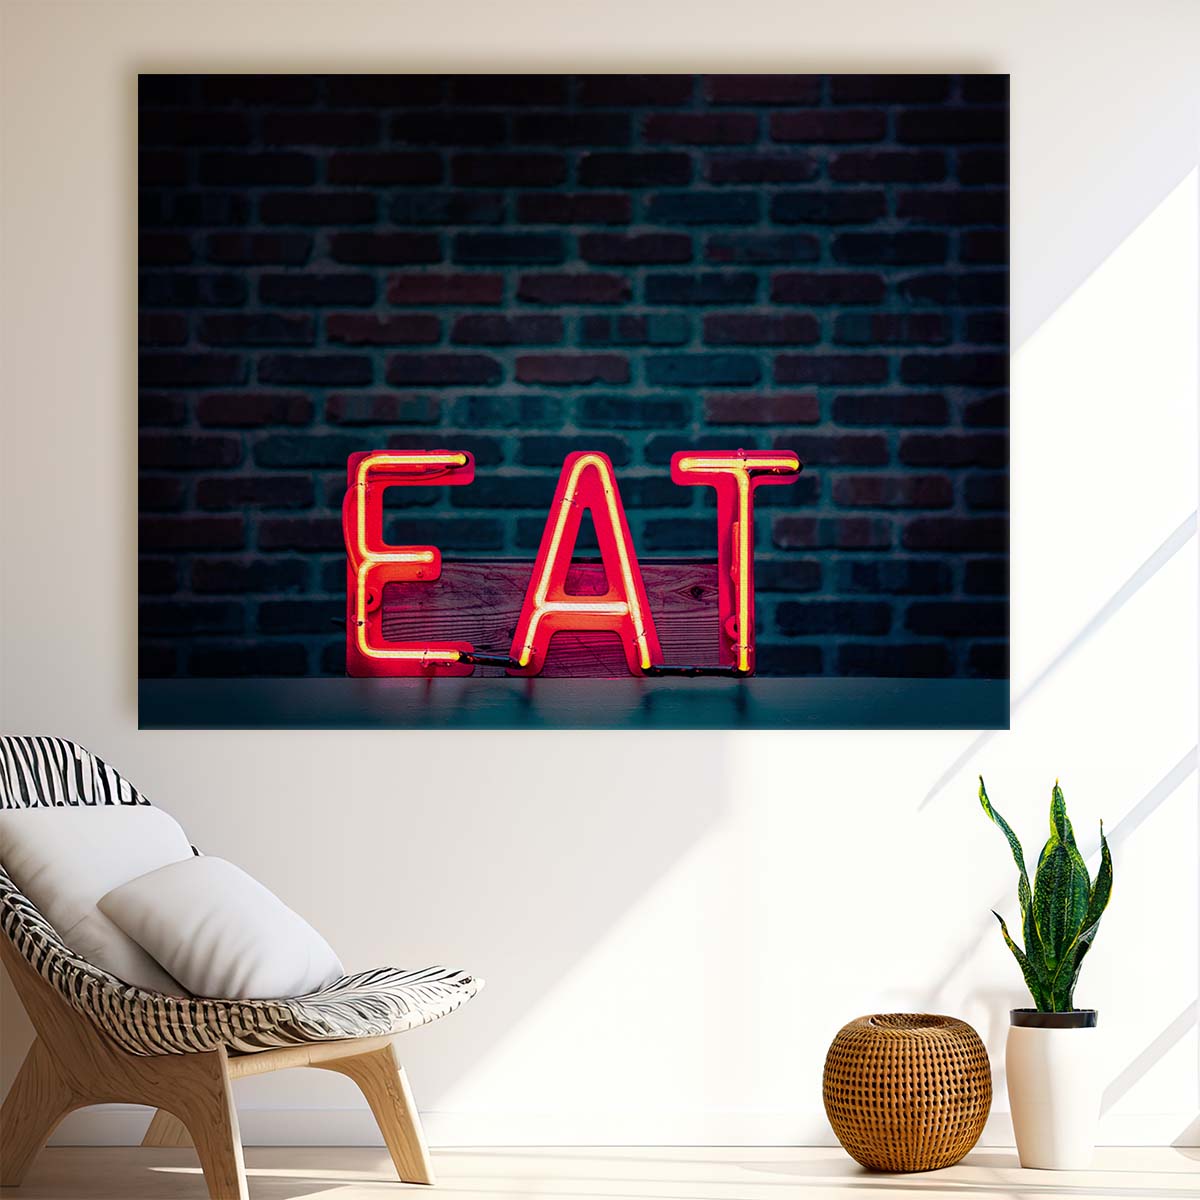 Red Neon 'EAT' Typography Brick Wall Art Sign by Luxuriance Designs. Made in USA.